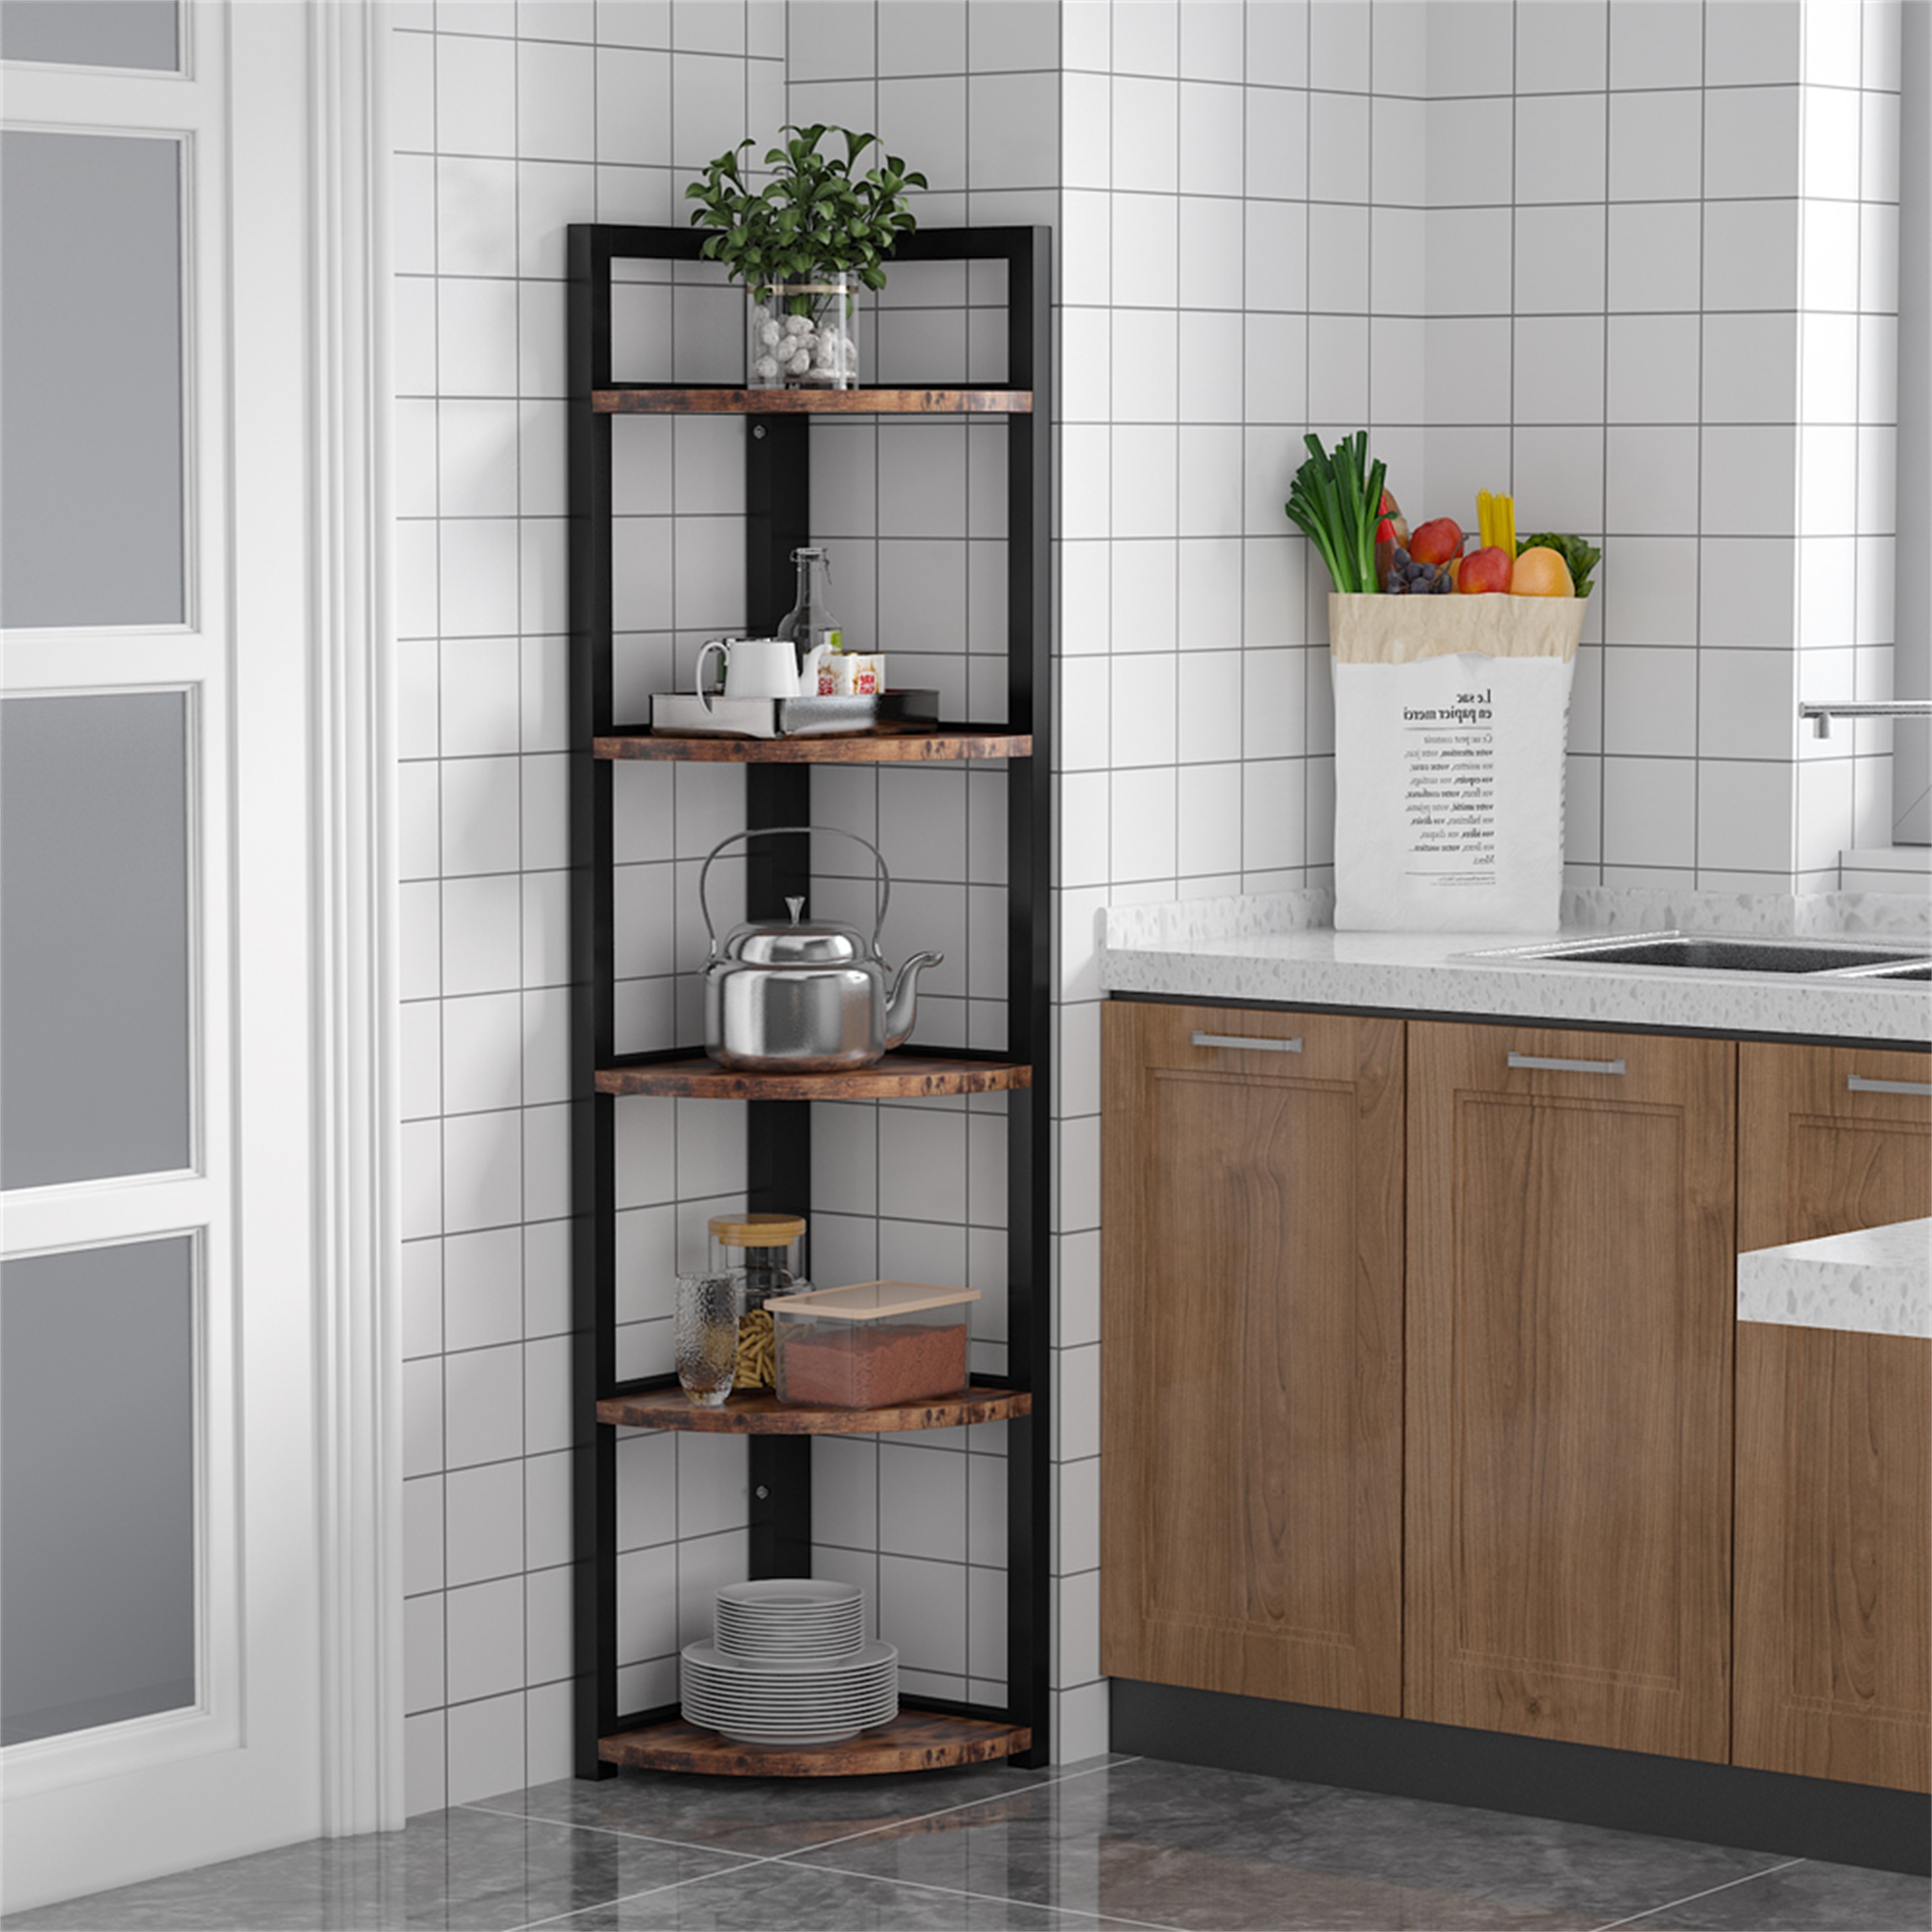 https://ak1.ostkcdn.com/images/products/is/images/direct/20e5d9a78a0caee27cd163a08ff1c6d9565348b2/5-Tier-Corner-Shelf%2C-Corner-Storage-Rack-Plant-Stand.jpg